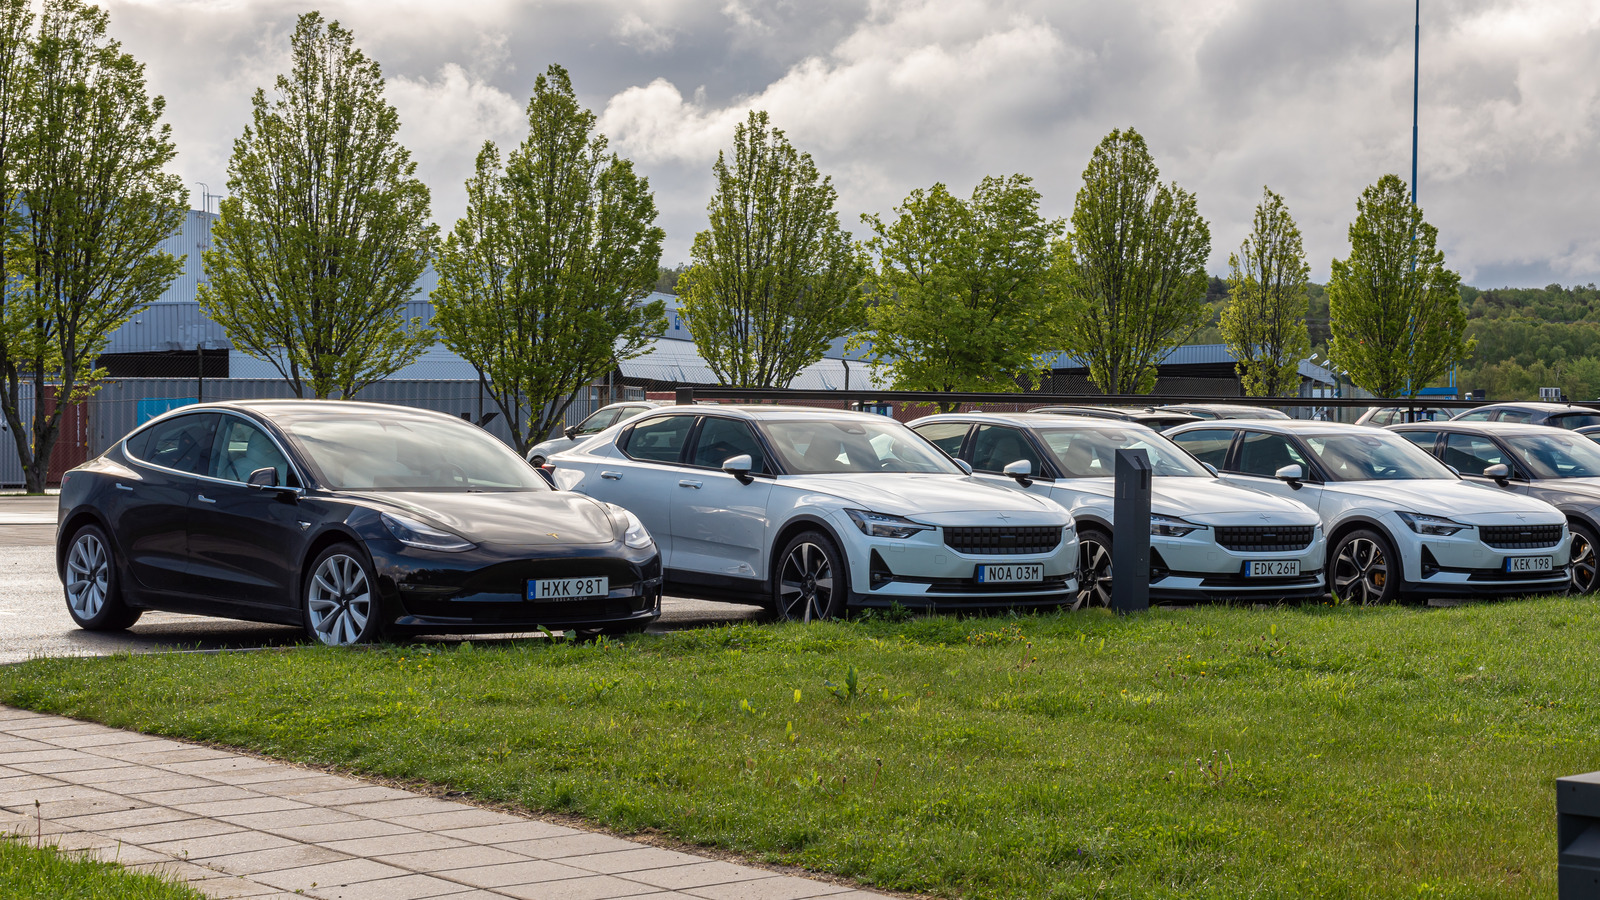 Tesla Model 3 Vs Polestar 2: Which Is The Better Electric Car?